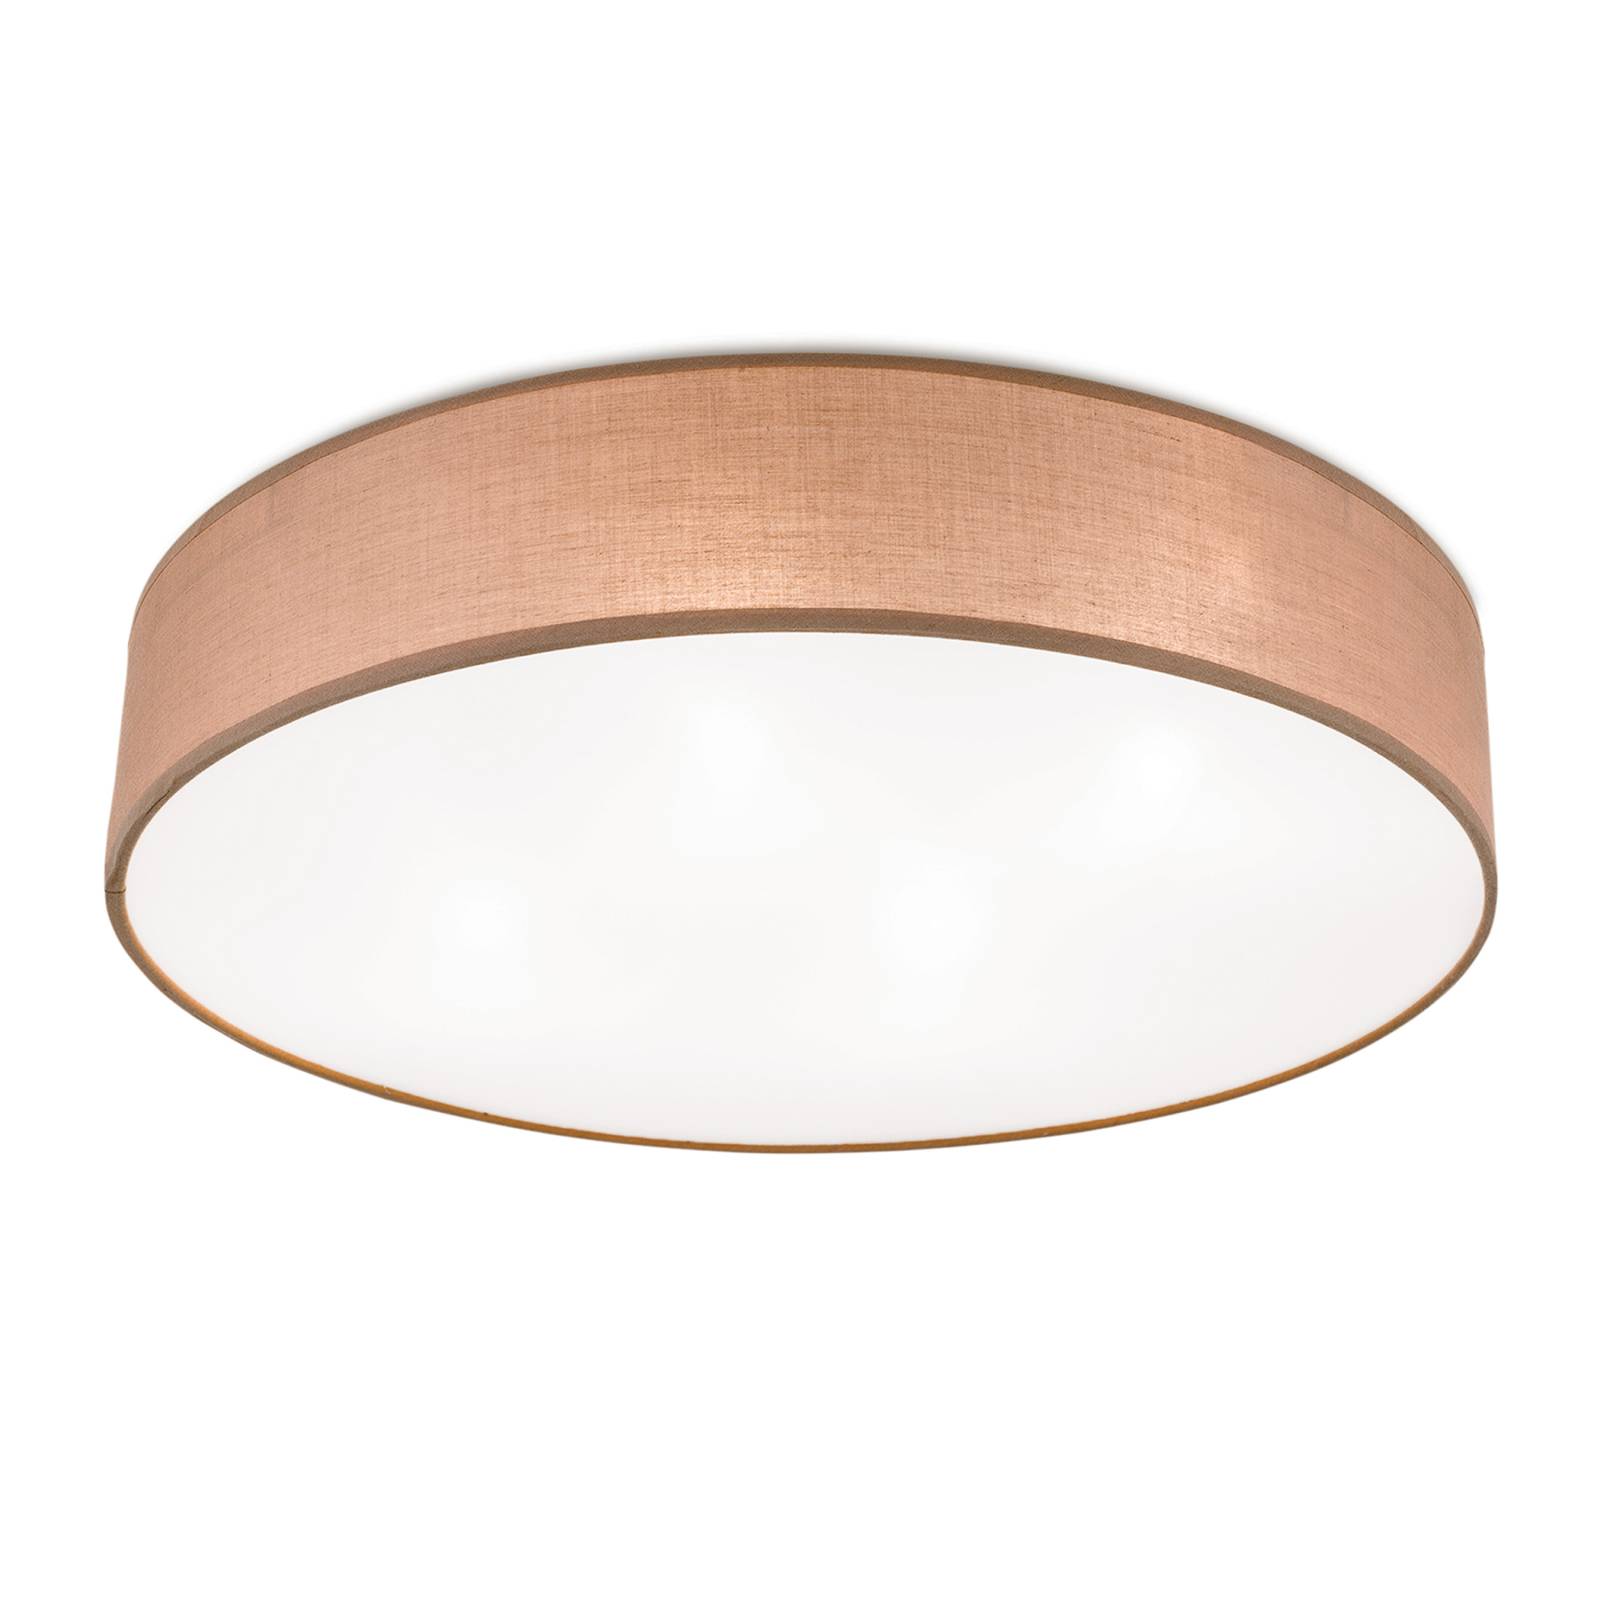 Ufo ceiling light with a linen lampshade, brown